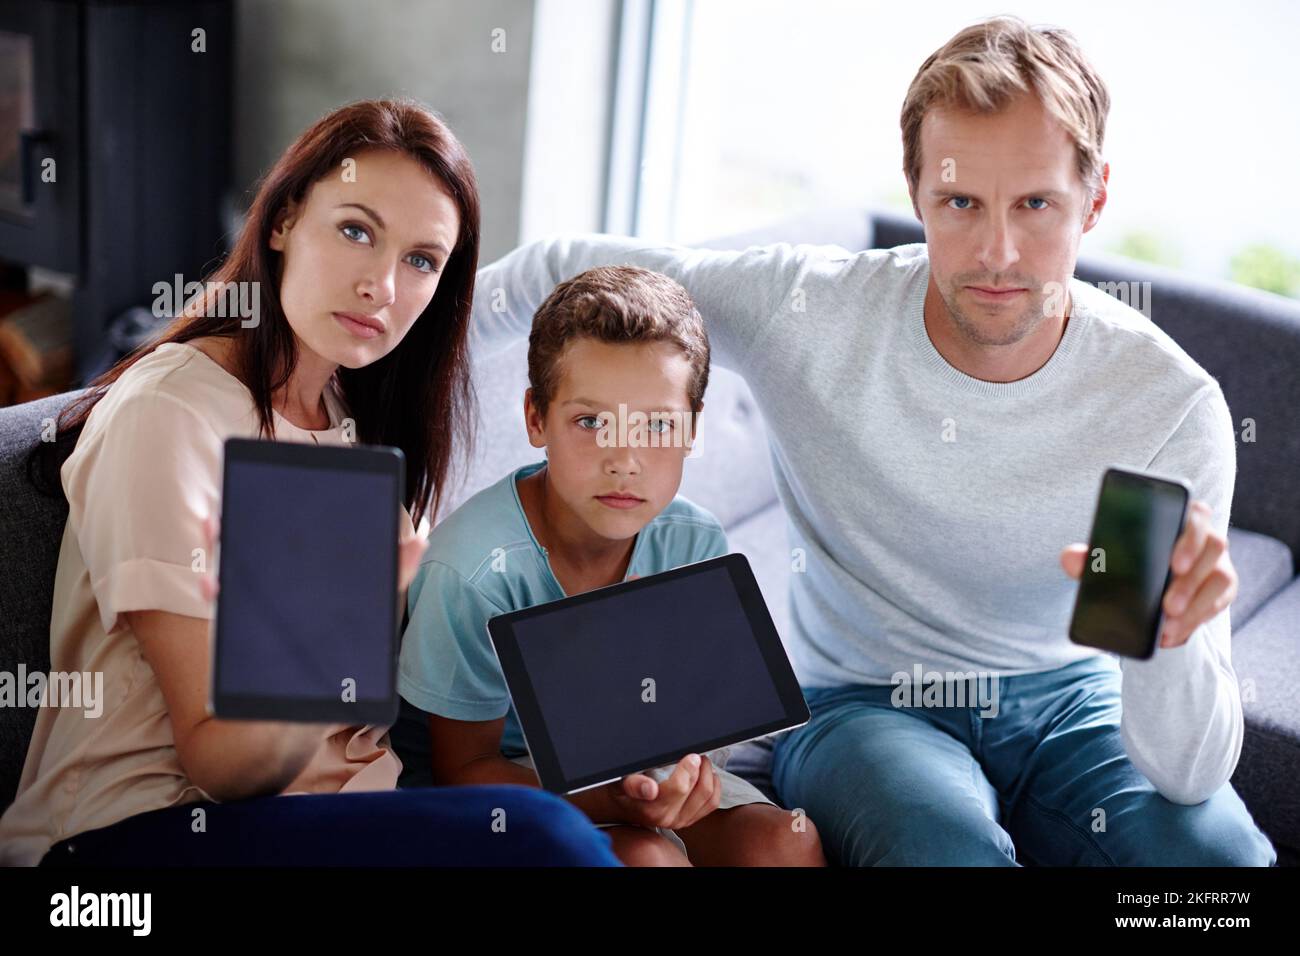 Technology is coming in the way of family time. Portrait of a family looking serious as they hold up their digital devices. Stock Photo